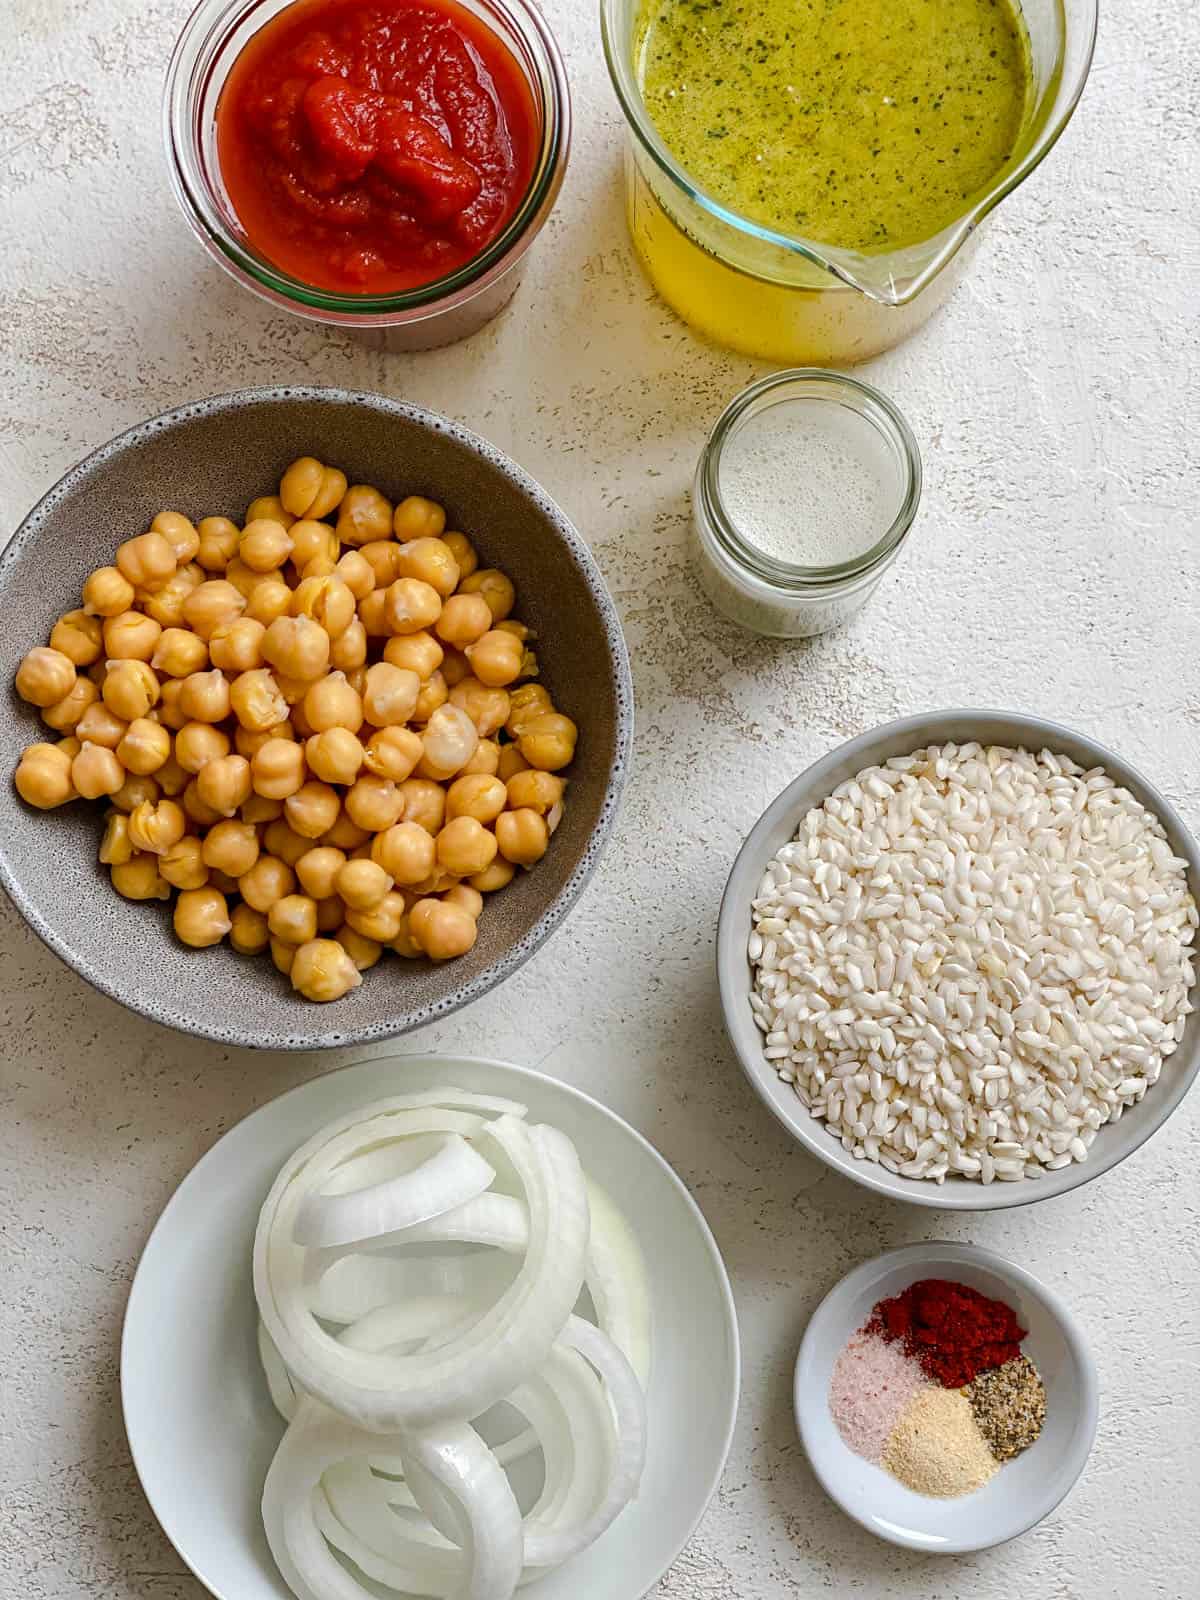 ingredients for Vegan Tandoori Chickpeas measured out a،nst a white surface